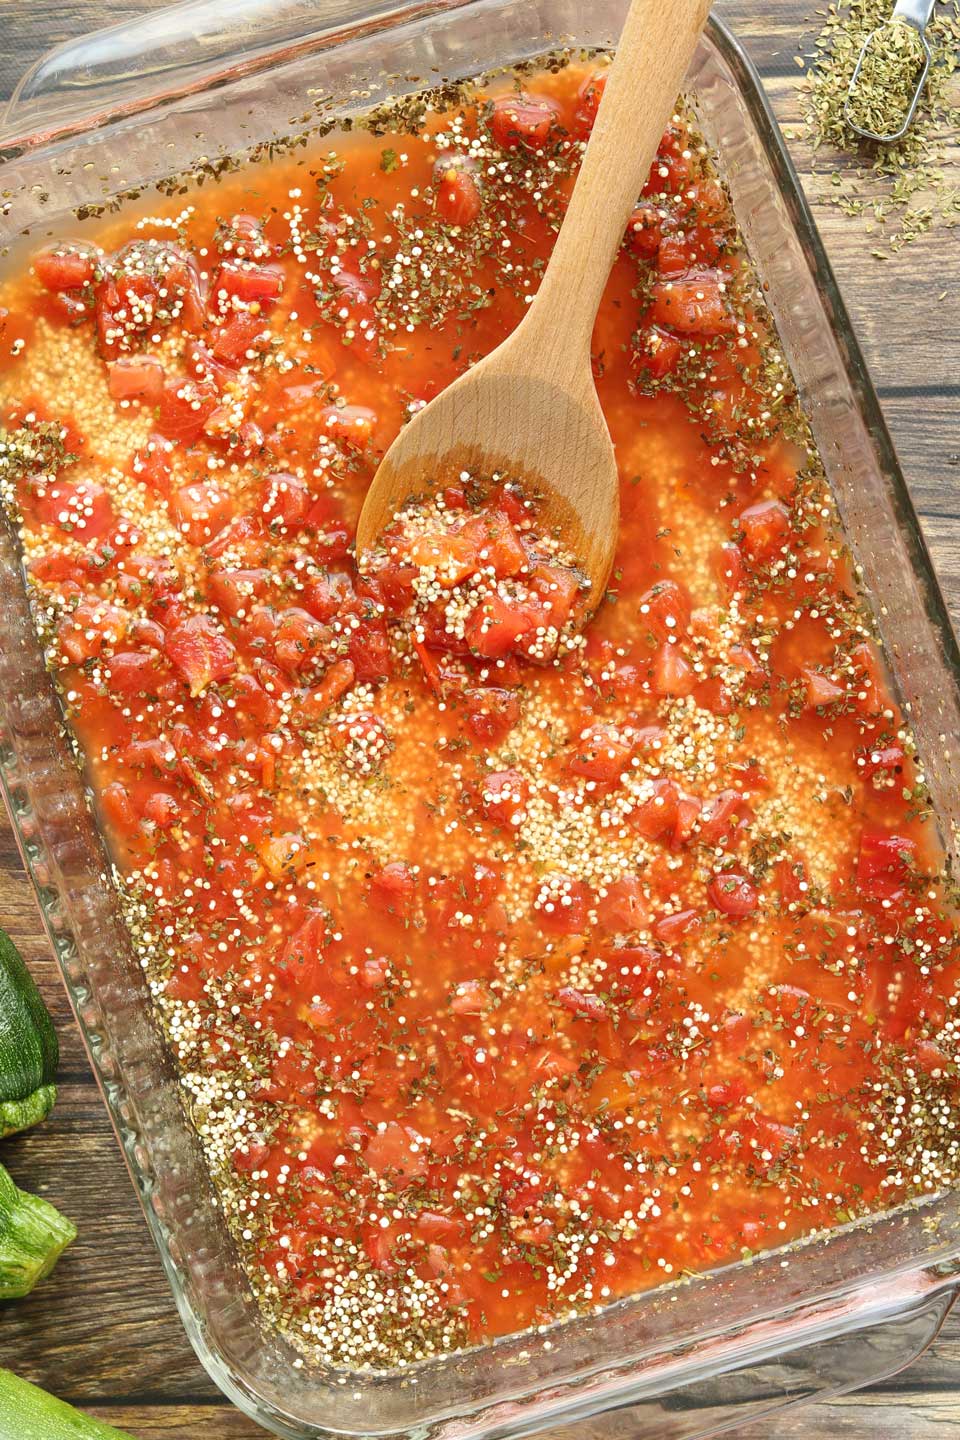 The perfect bed for our zucchini boats – we mix quinoa and tomatoes with Italian spices, stirring it up right in the baking dish for an easy one-pot dinner recipe that’s big on flavor but fast to throw together!